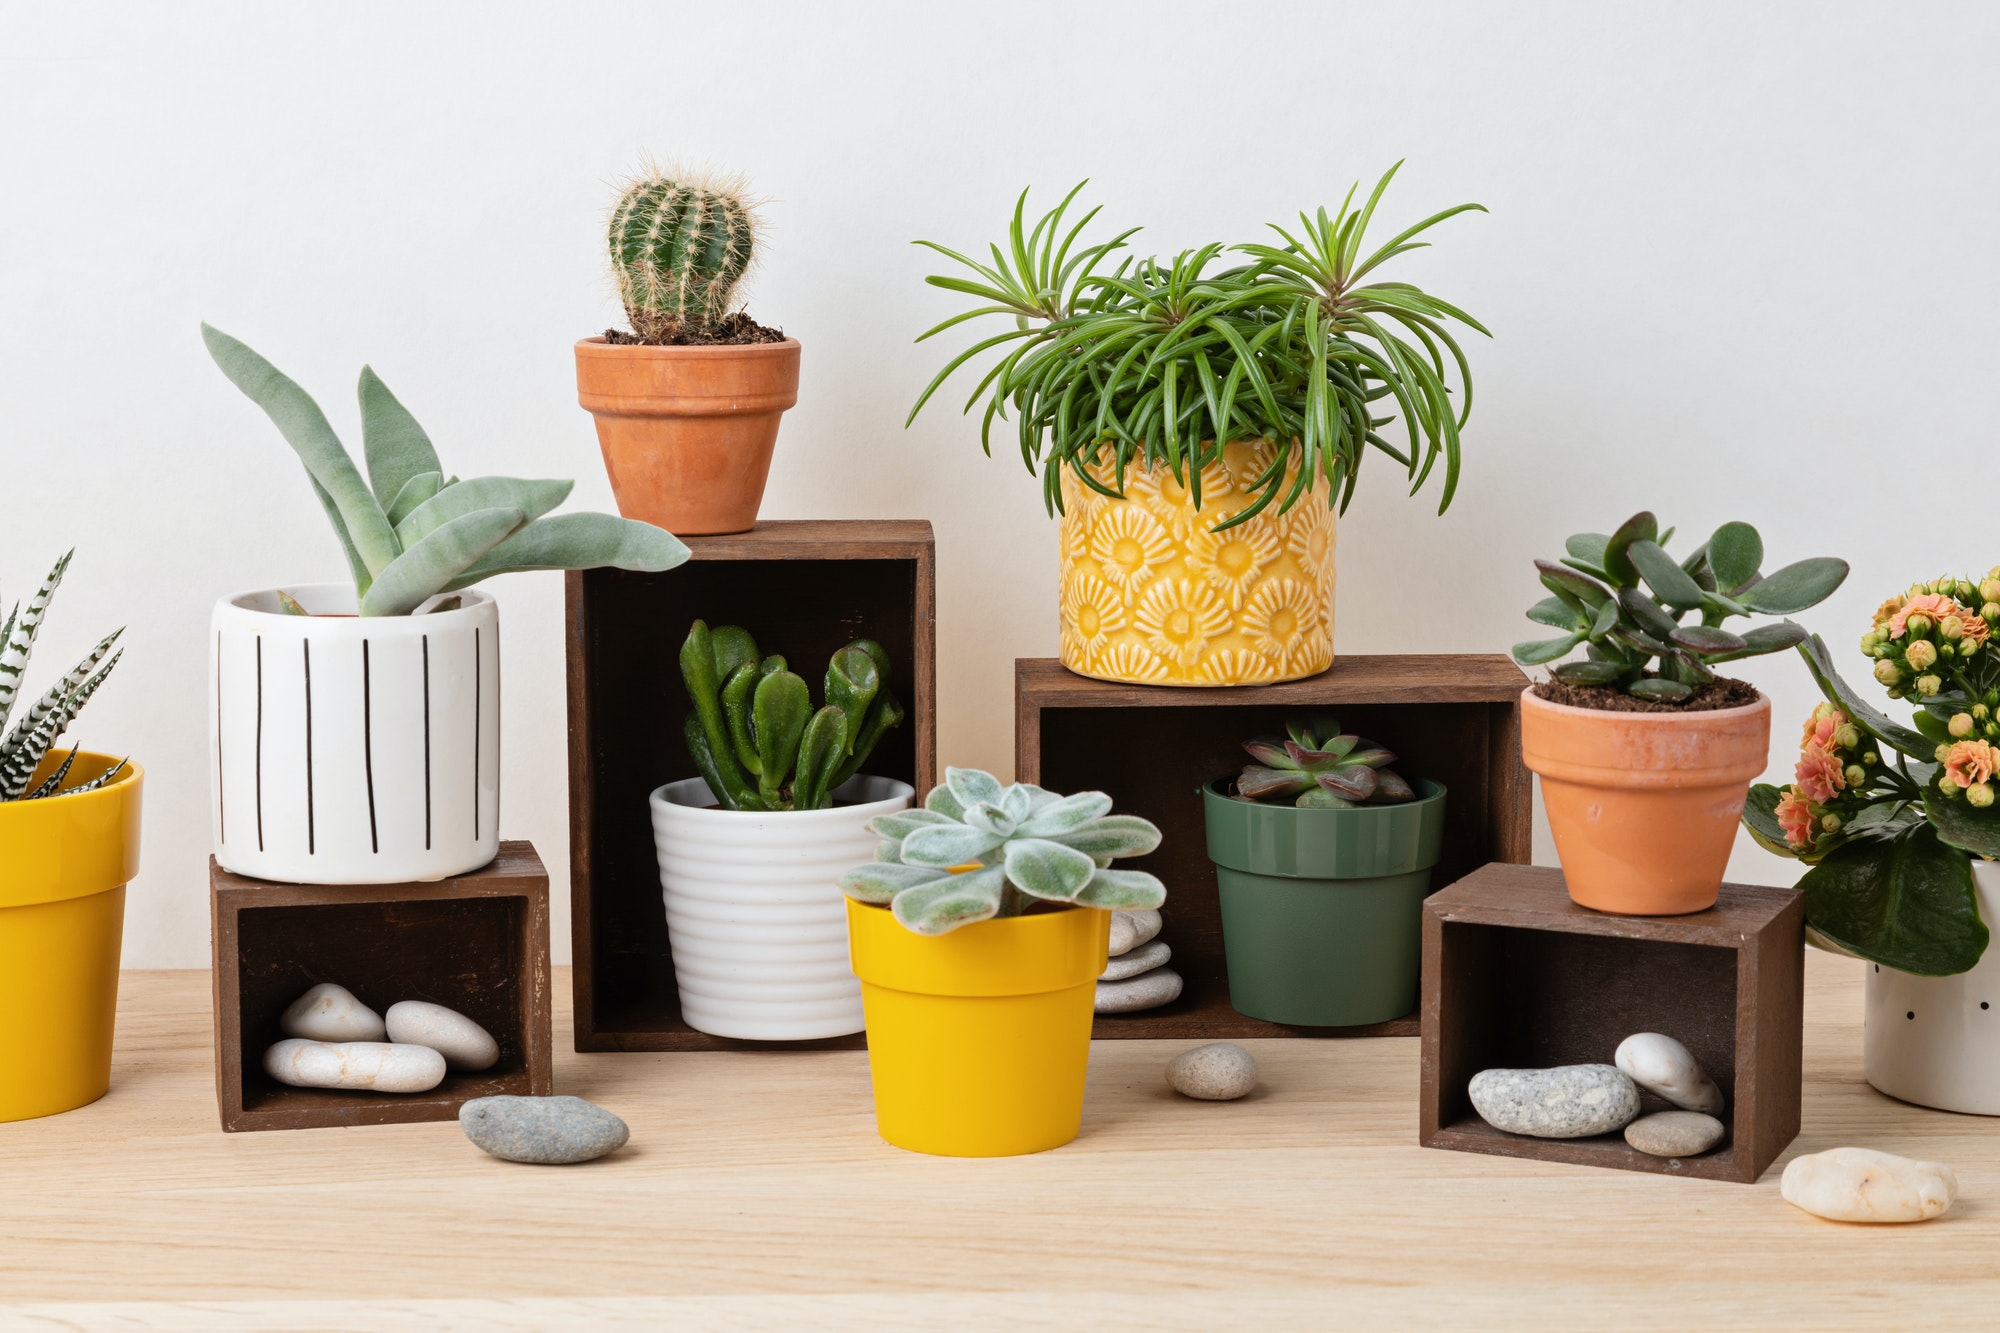 Collection of various succulents and plants in colored pots. Potted cactus and house plants against